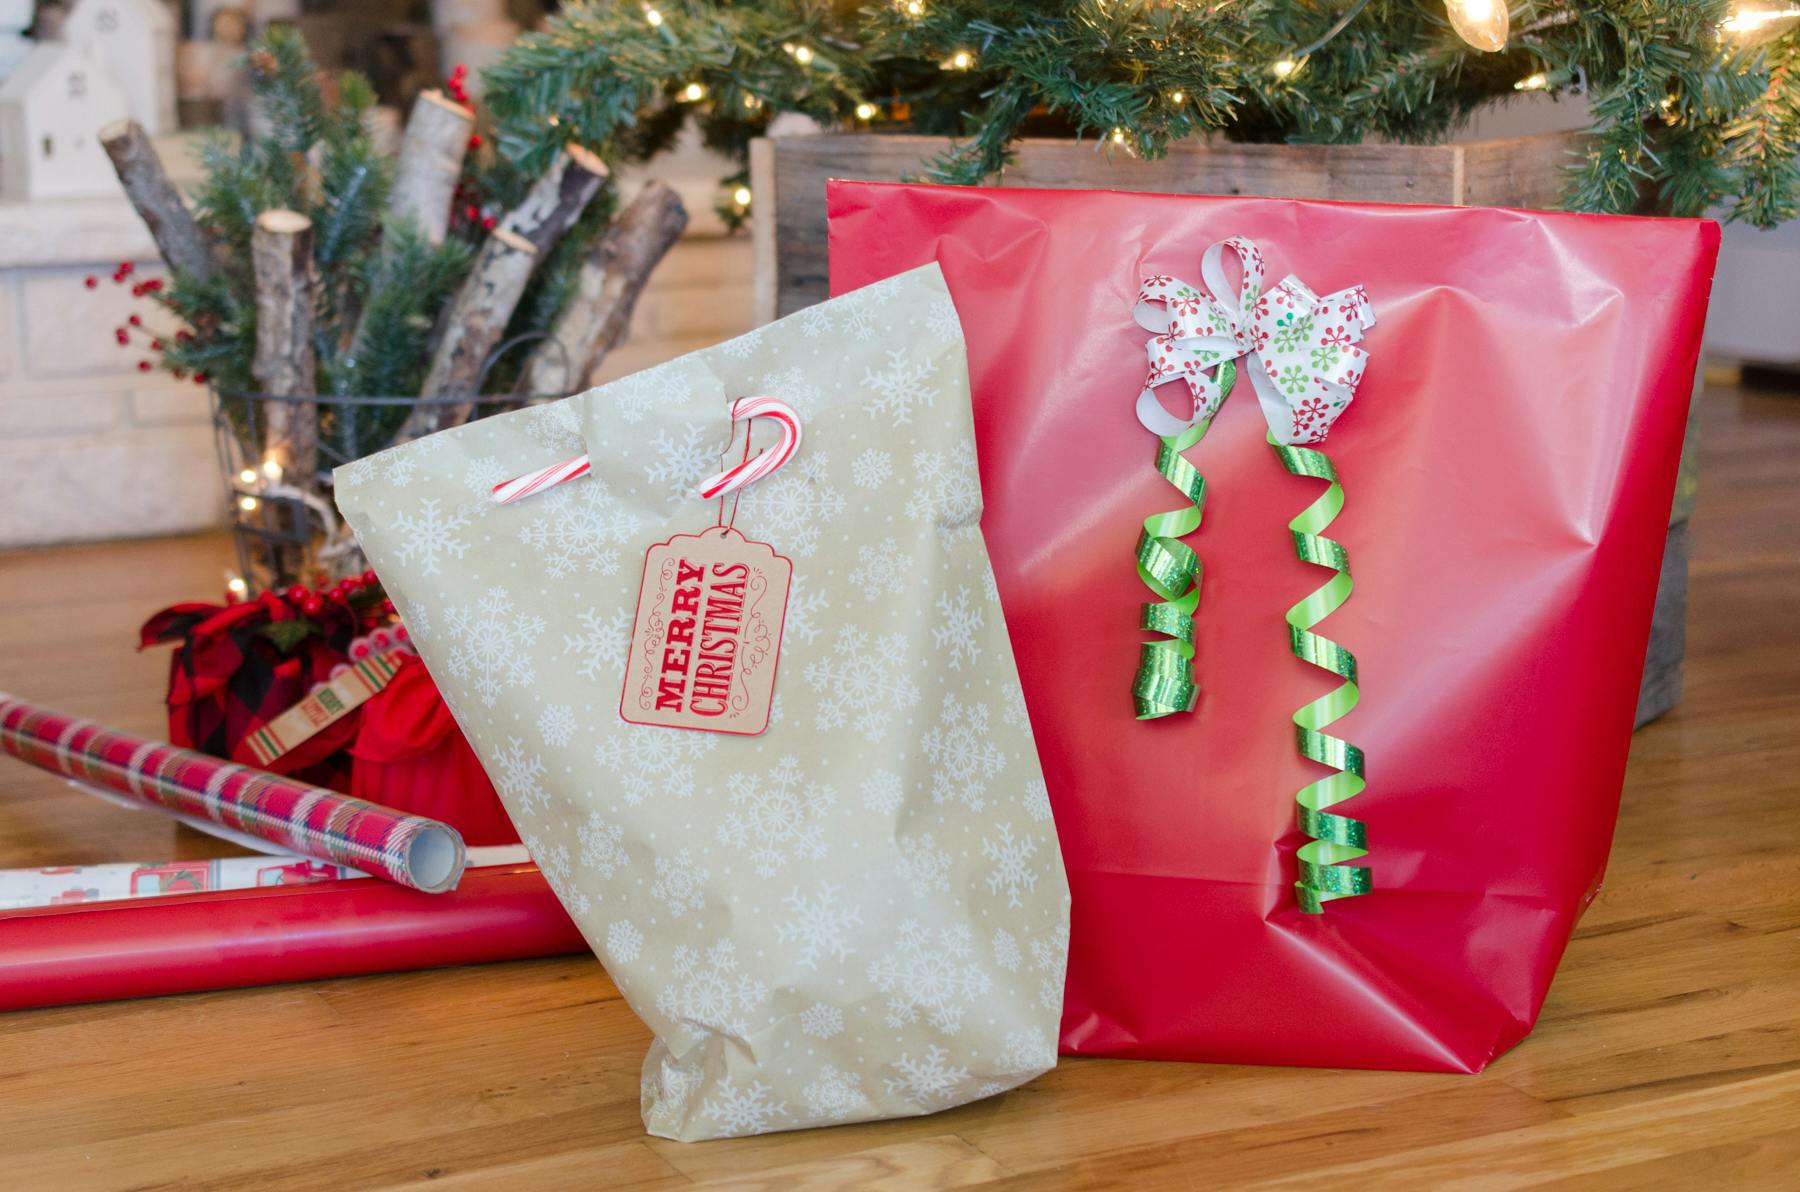 two diy wrapping paper bags sitting near a christmas tree with gift wrap near by.